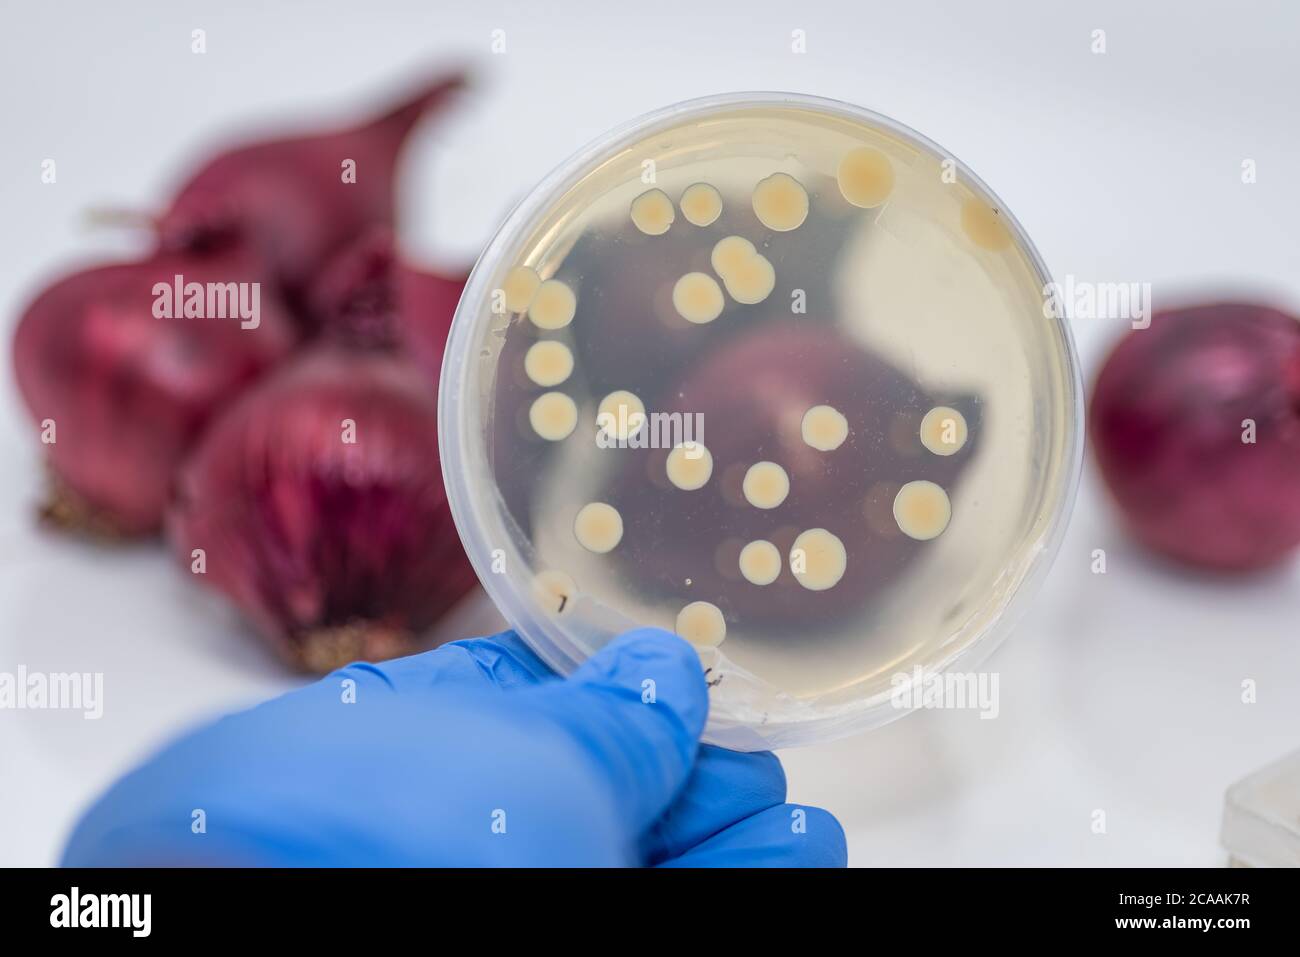 Pathogenic E coli/ Salmonella contamination in red onion, culture plate showing bacterial colony isolated from contaminated red onion Stock Photo